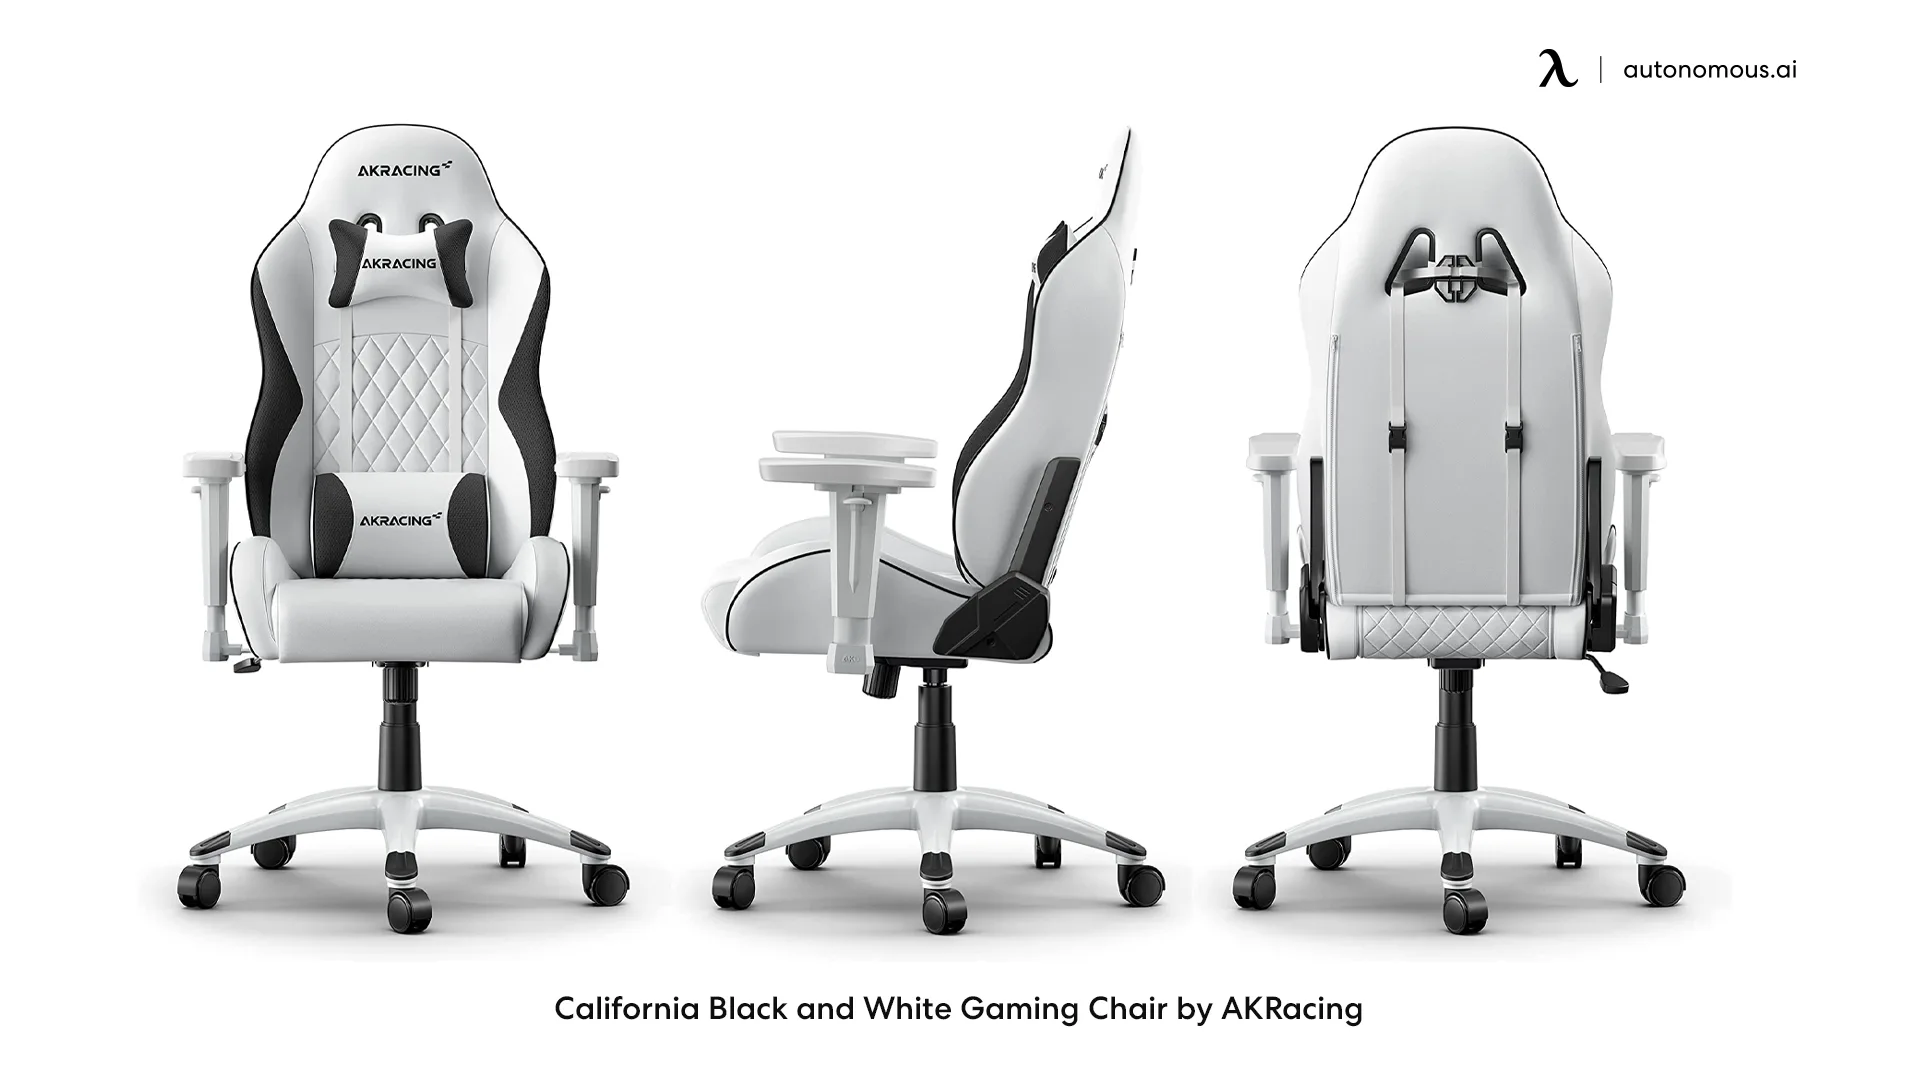 California Black and White Gaming Chair by AKRacing